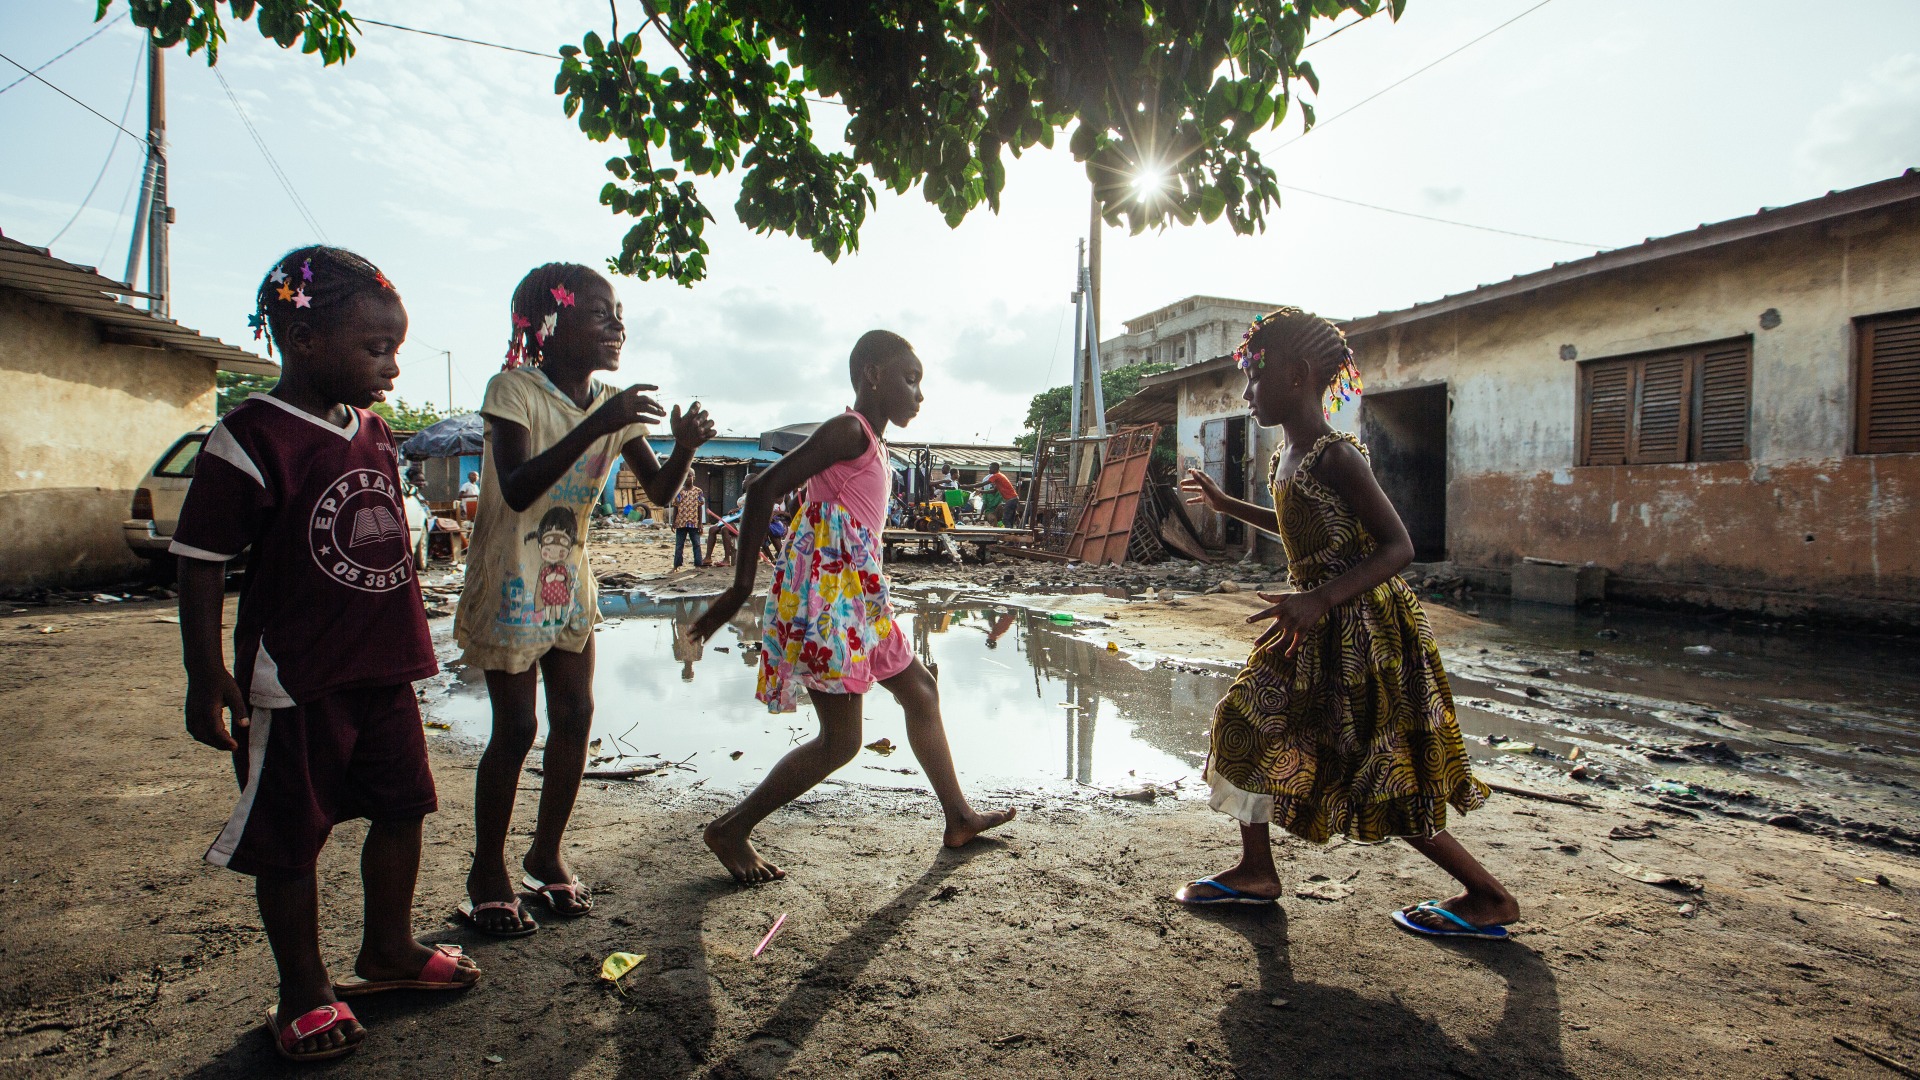 Girls play in their neighborhood in Abidjan, a city in the south of Ivory Coast.